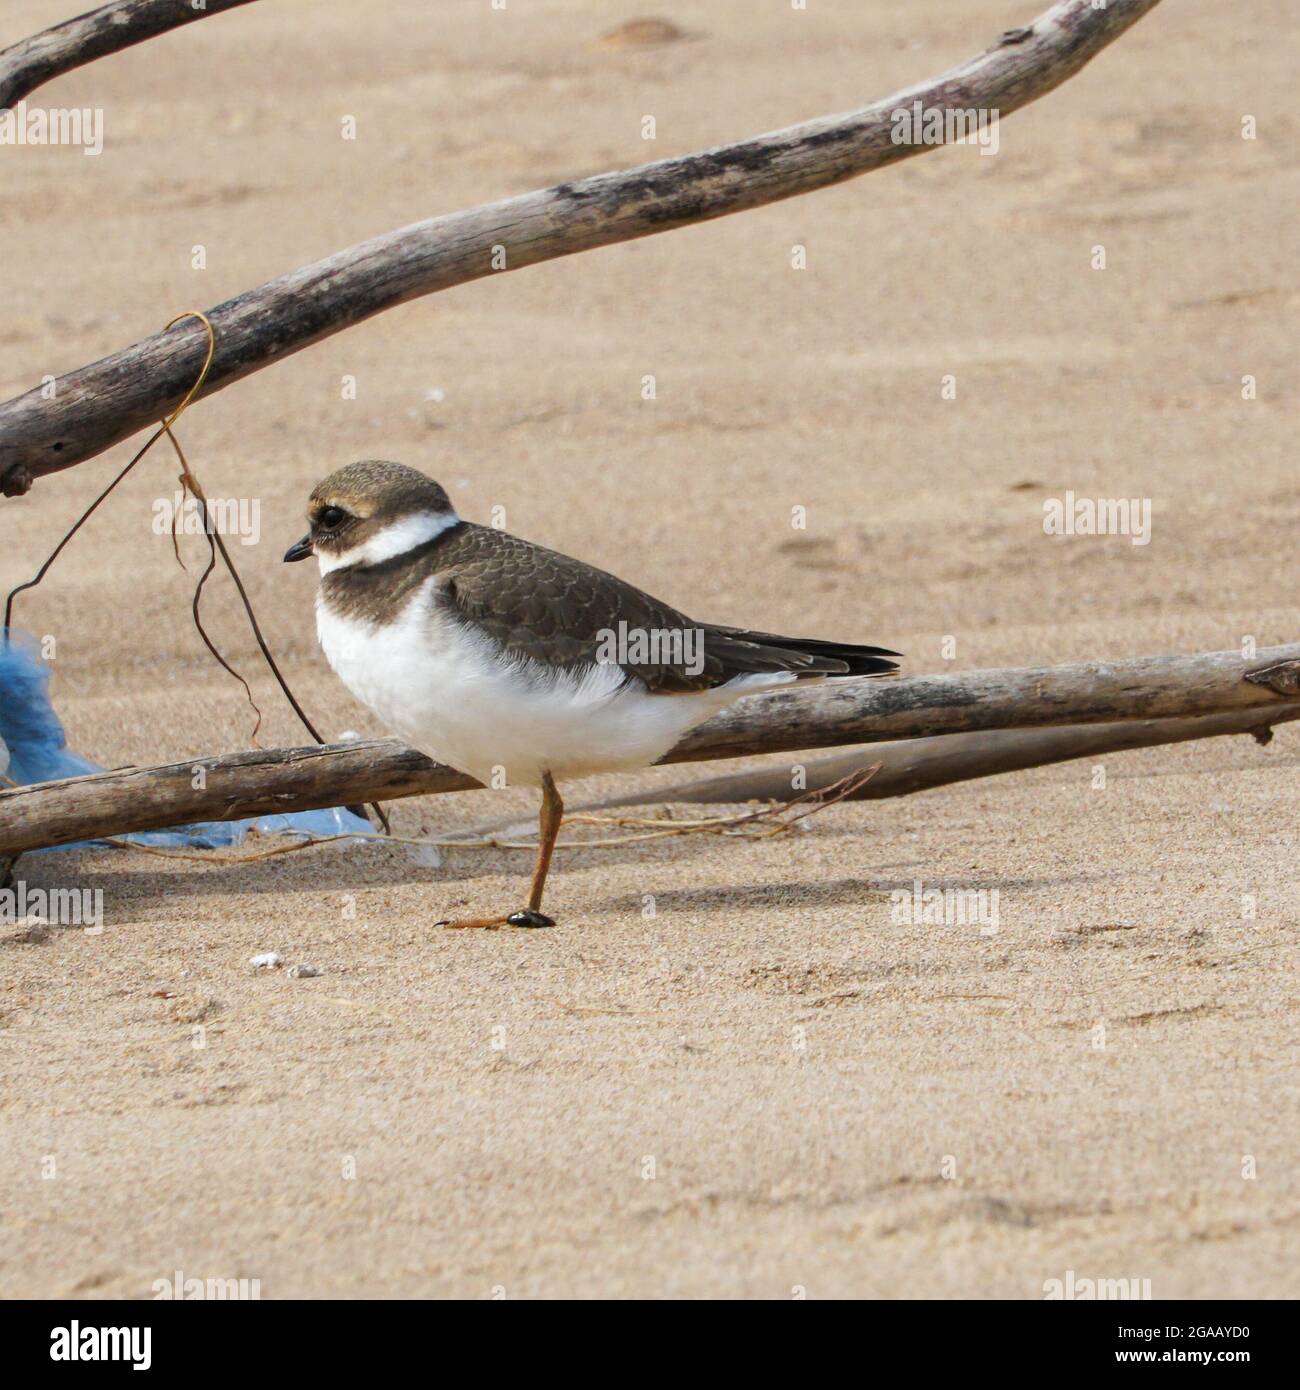 Small gray bird Big-billed plover on a sandy beach. Greater Sand Plover-Charadrius leschenaultii Stock Photo